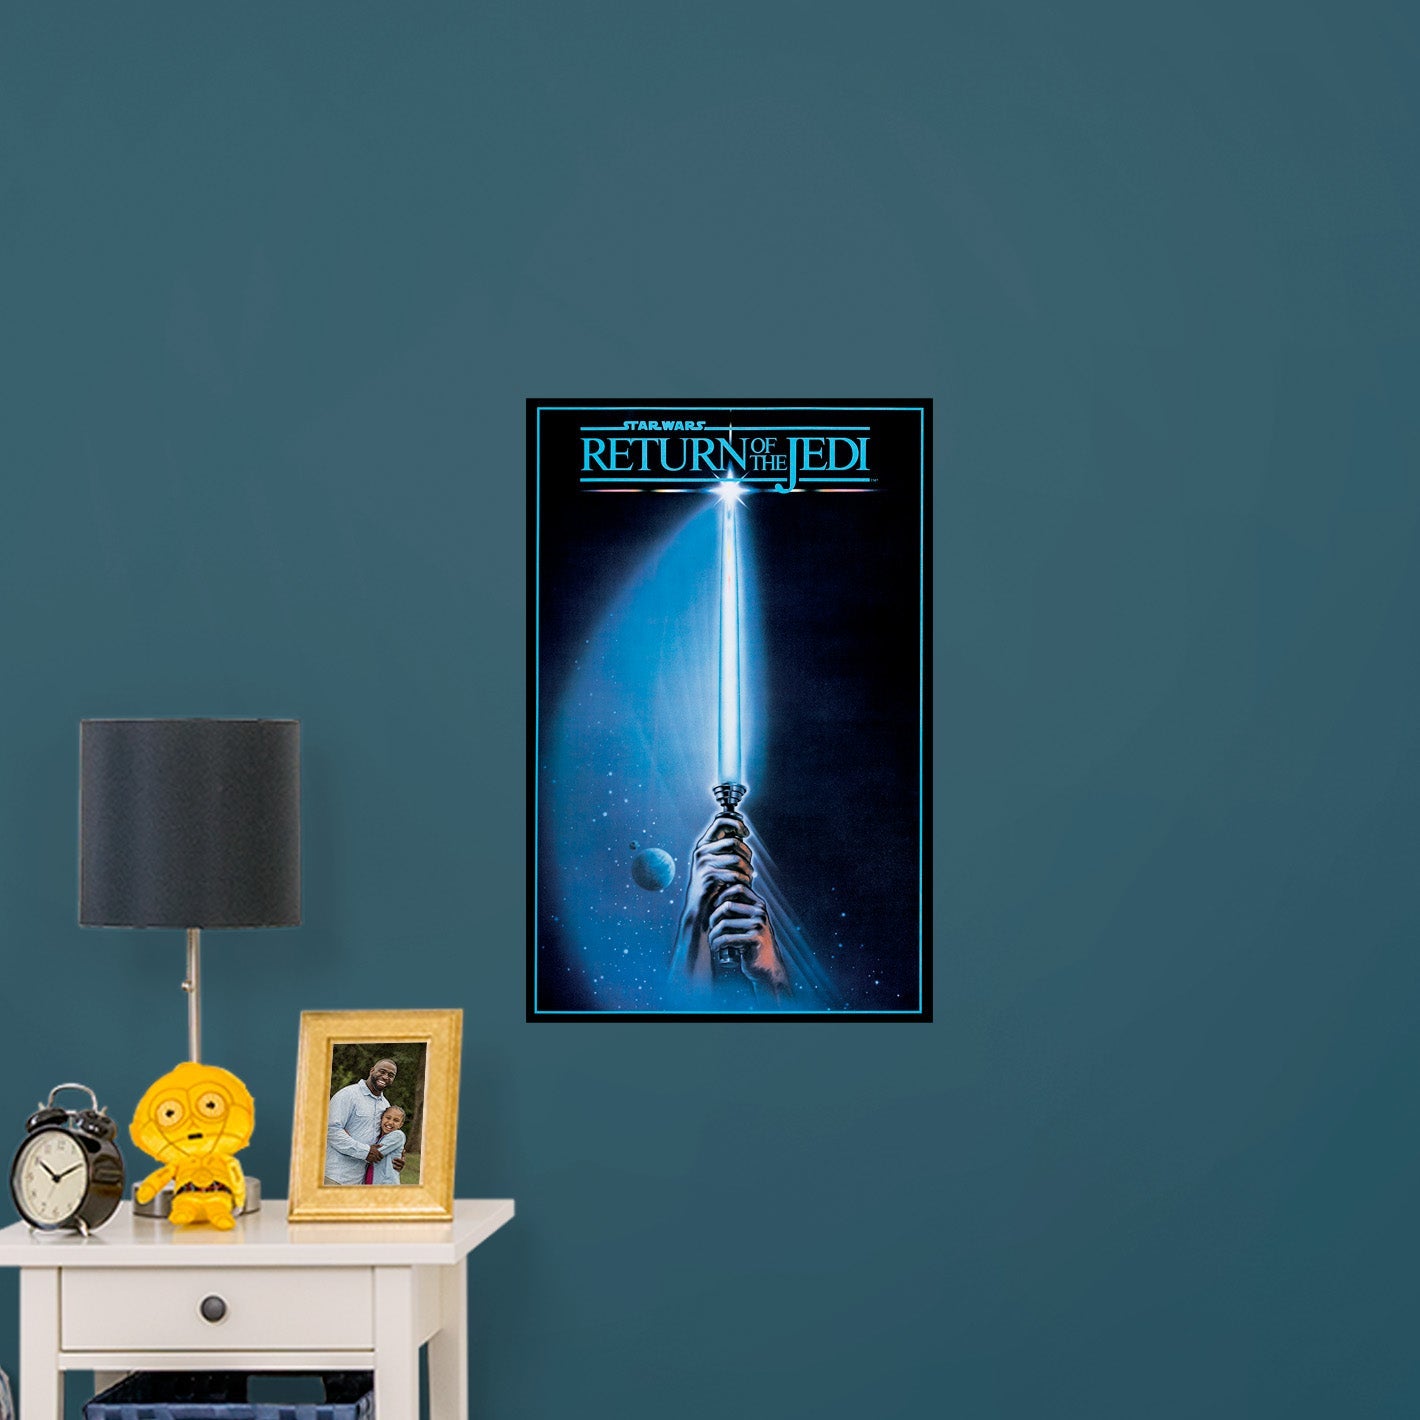 Return of the Jedi 40th: Lightsaber Movie Poster - Officially Licensed Star Wars Removable Adhesive Decal